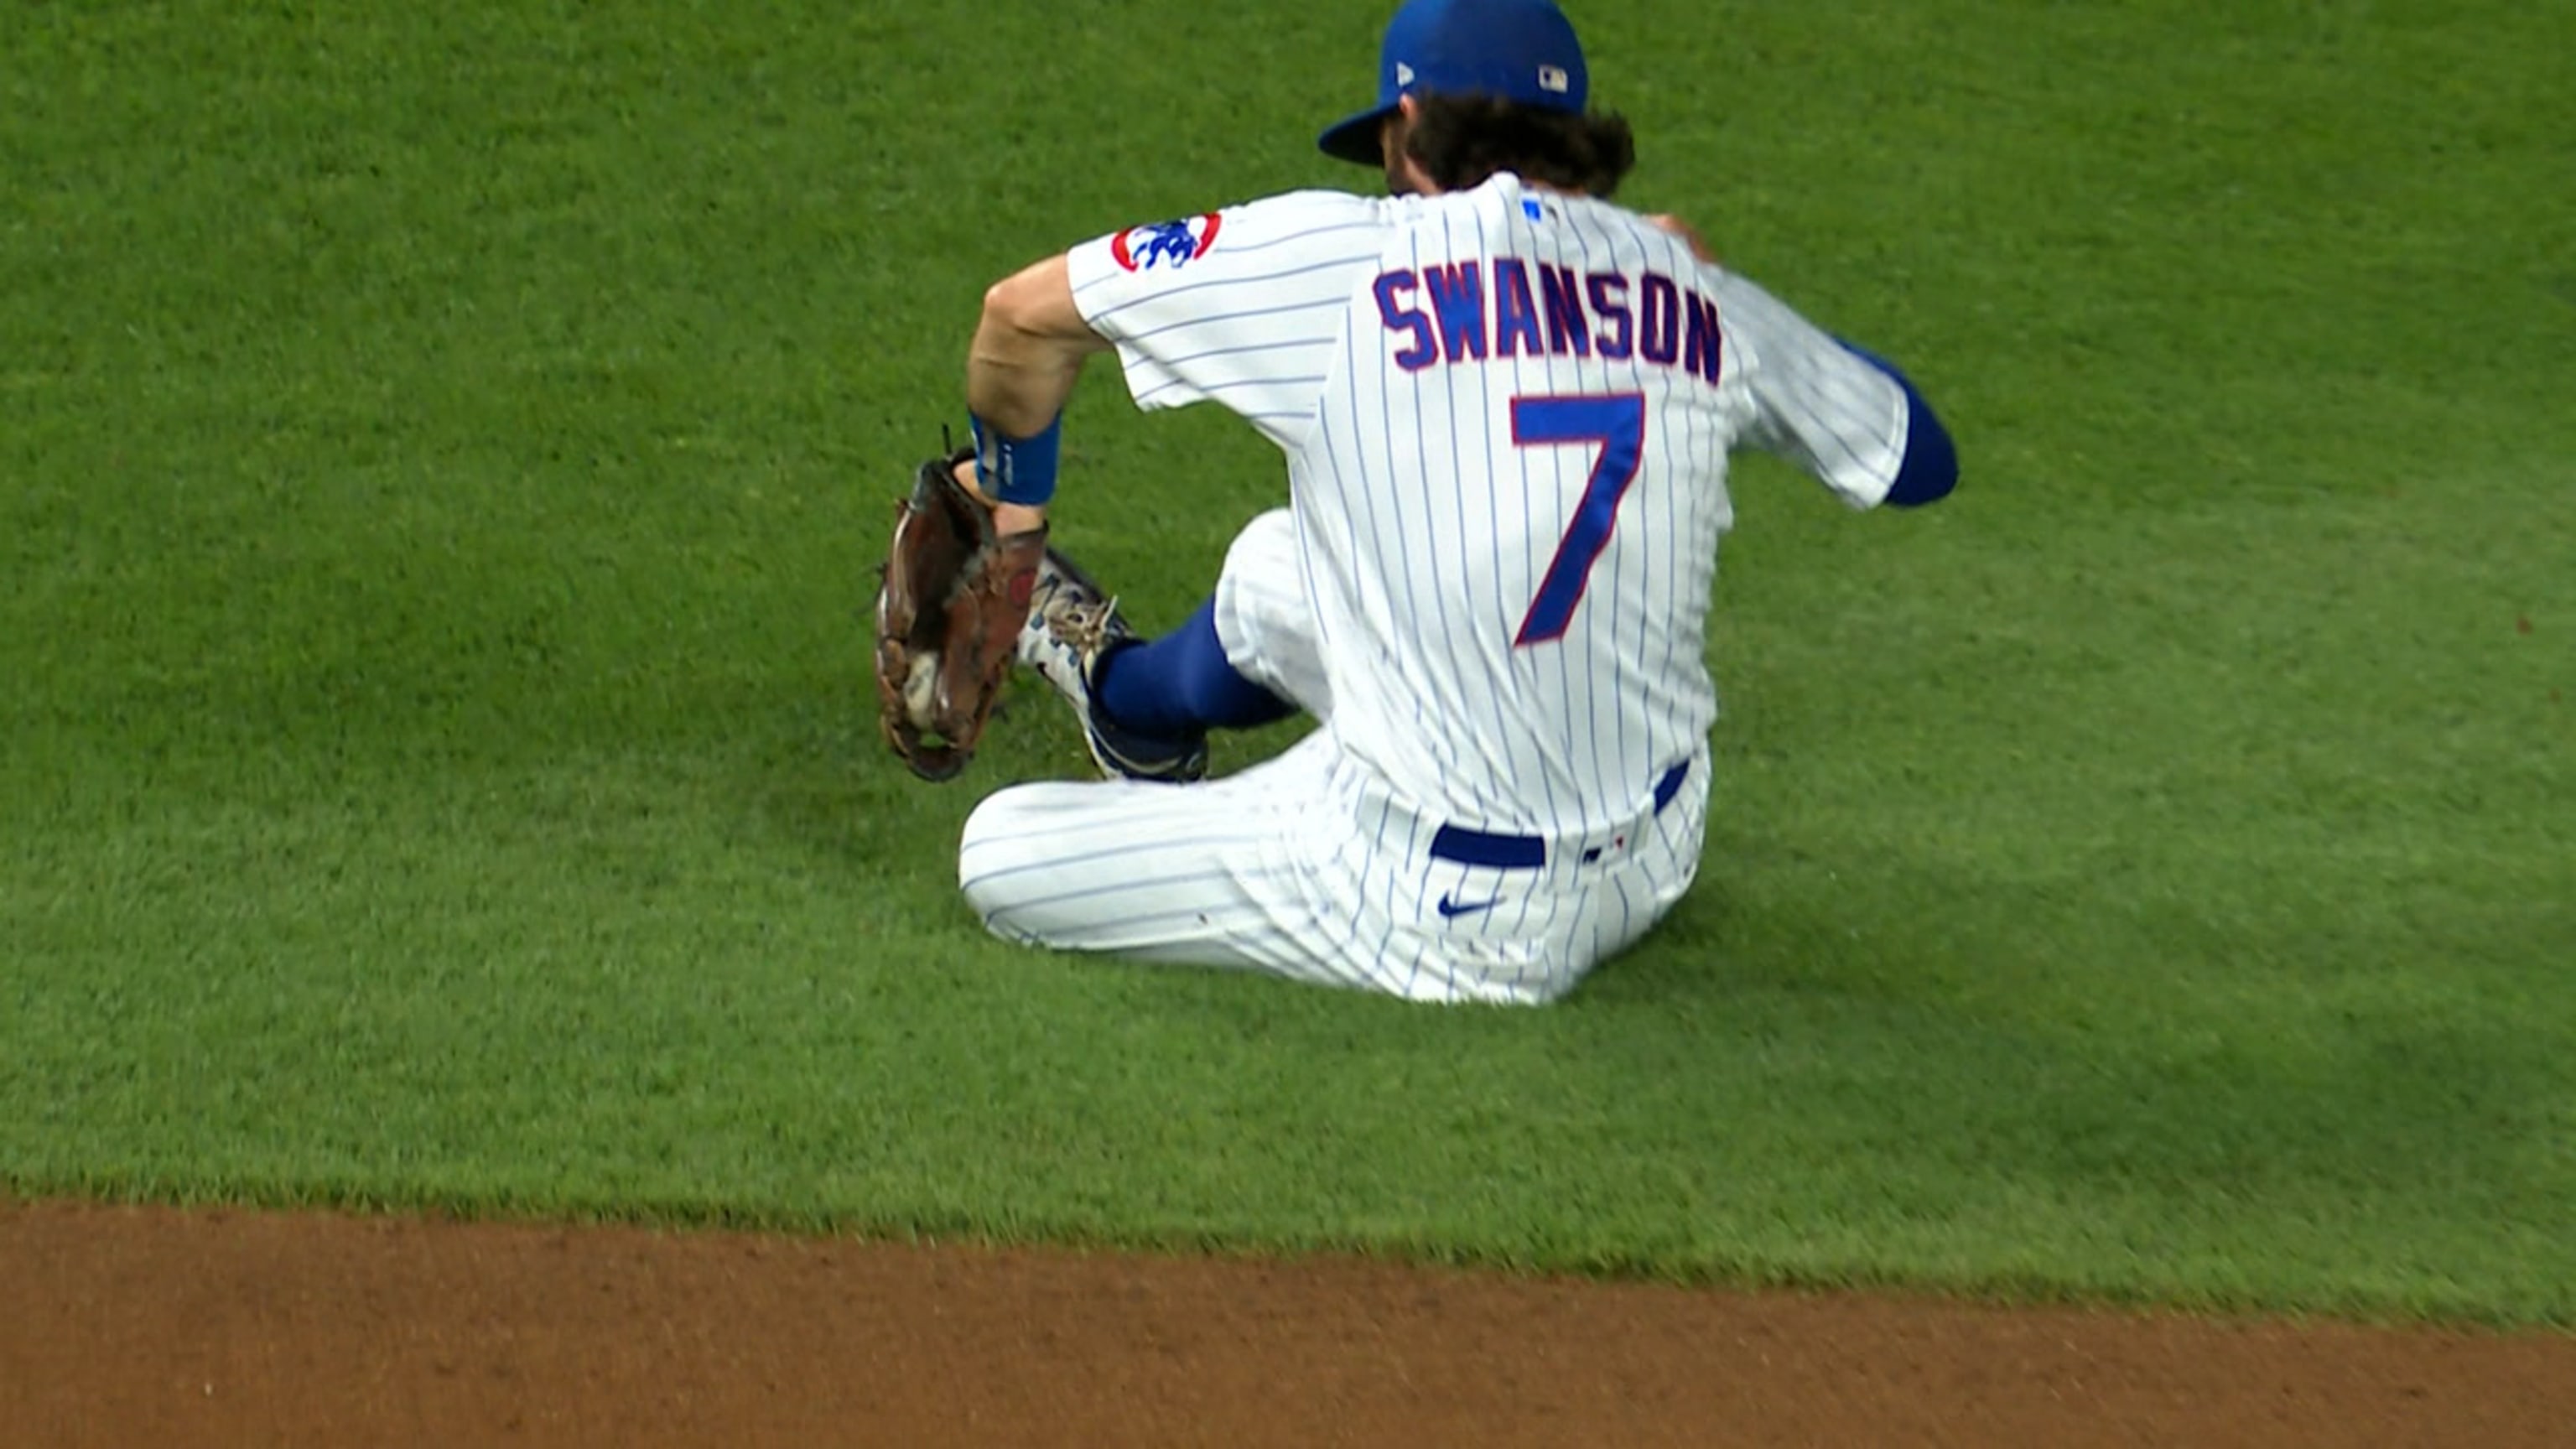 Dansby Swanson returns to Atlanta with the Chicago Cubs